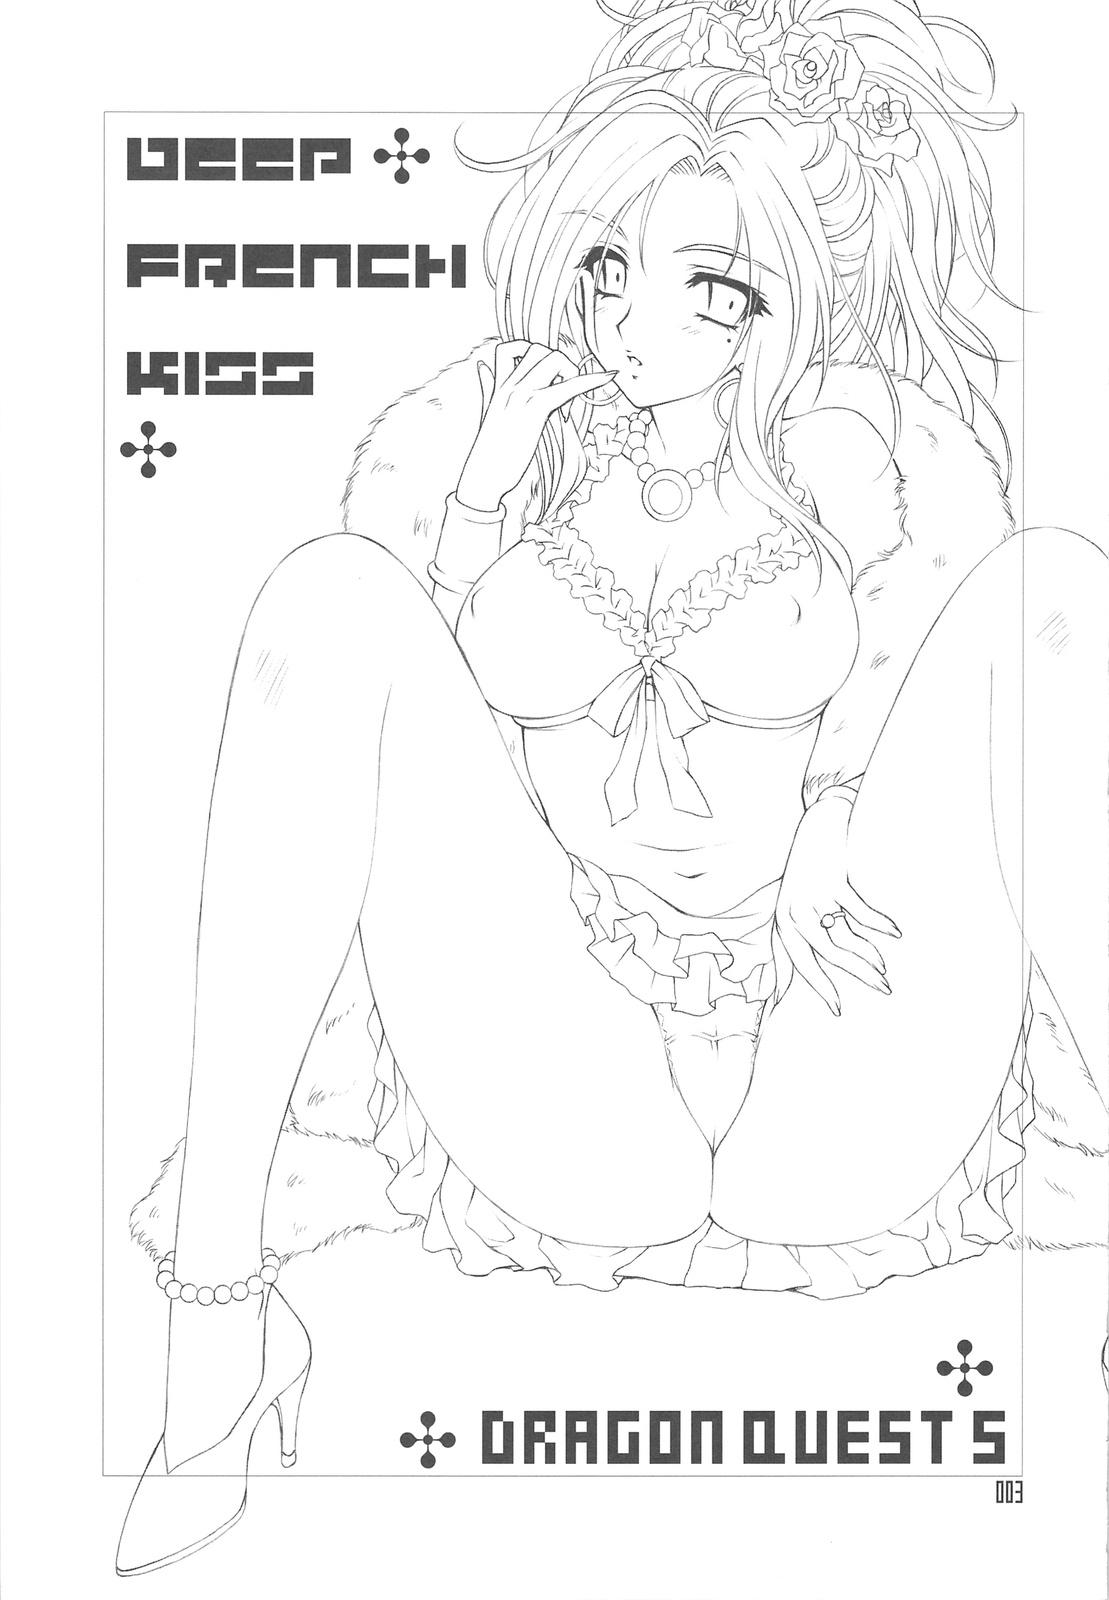 Twinks DEEP FRENCH KISS - Dragon quest v Blond - Page 2